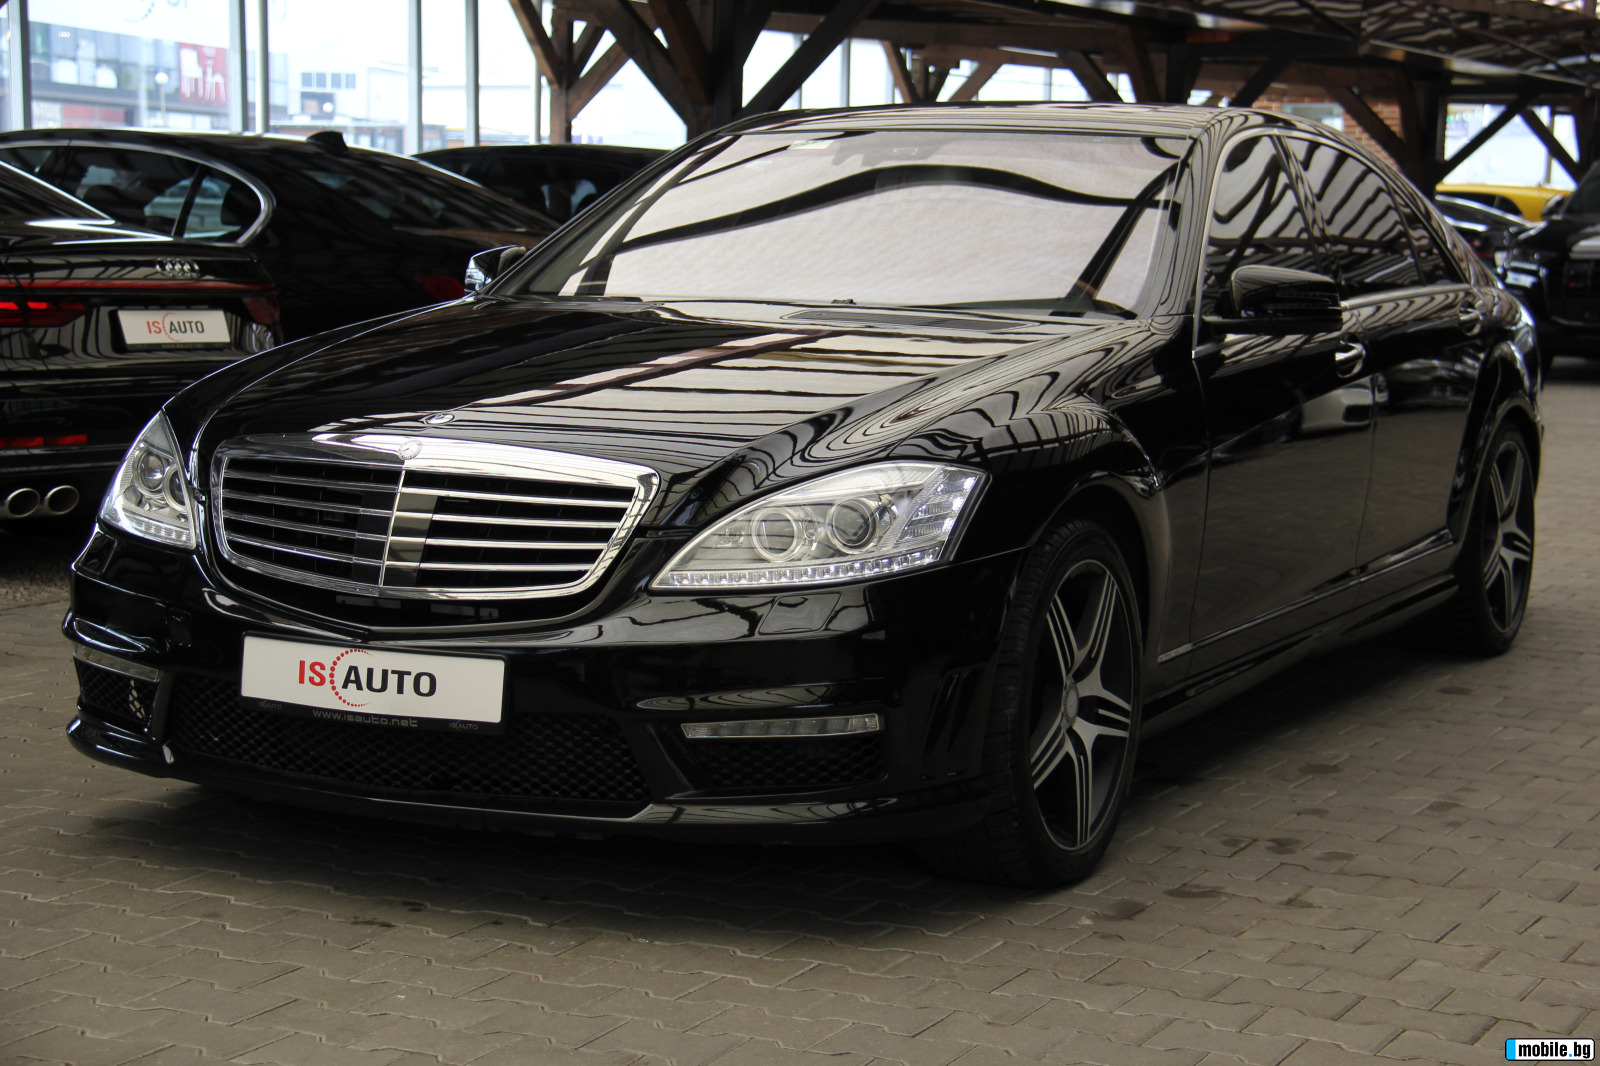 Mercedes-Benz S 500 AMG/4Matic/RSE/Distronic | Mobile.bg   2